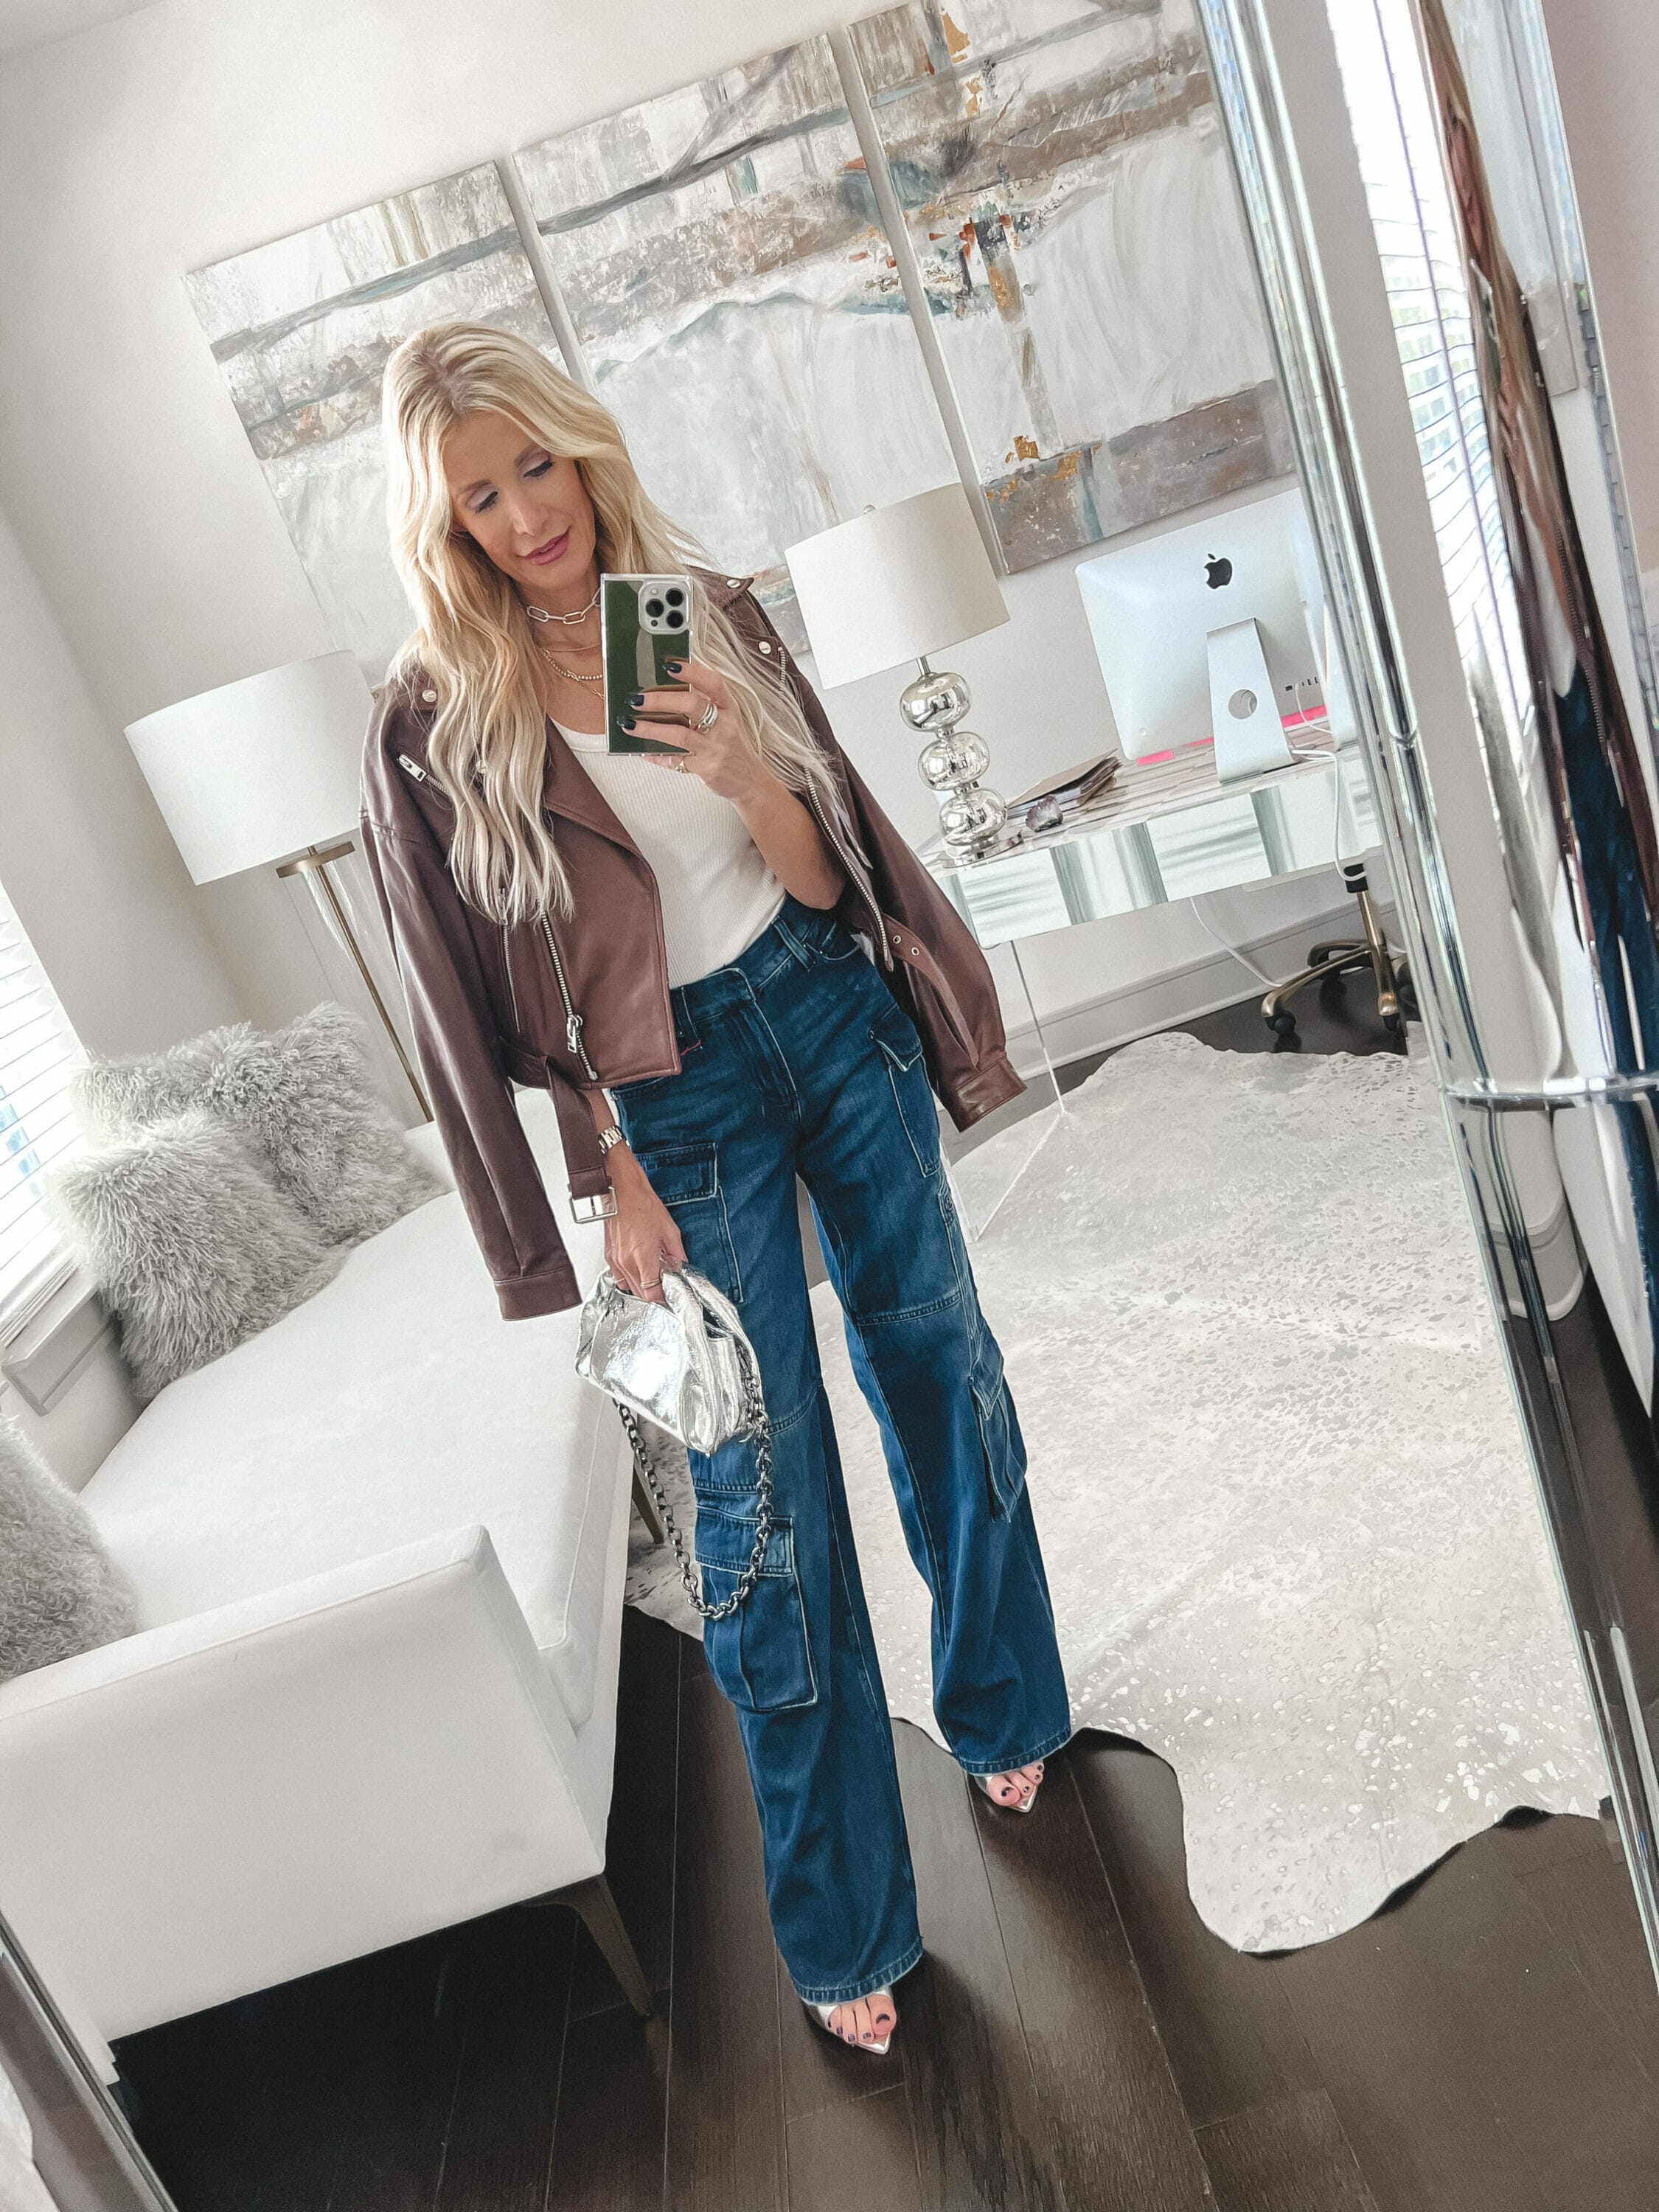 Dallas fashion blogger wearing cargo denim with a brown leather jacket and silver accessories as items part of the Saks friends and family sale.